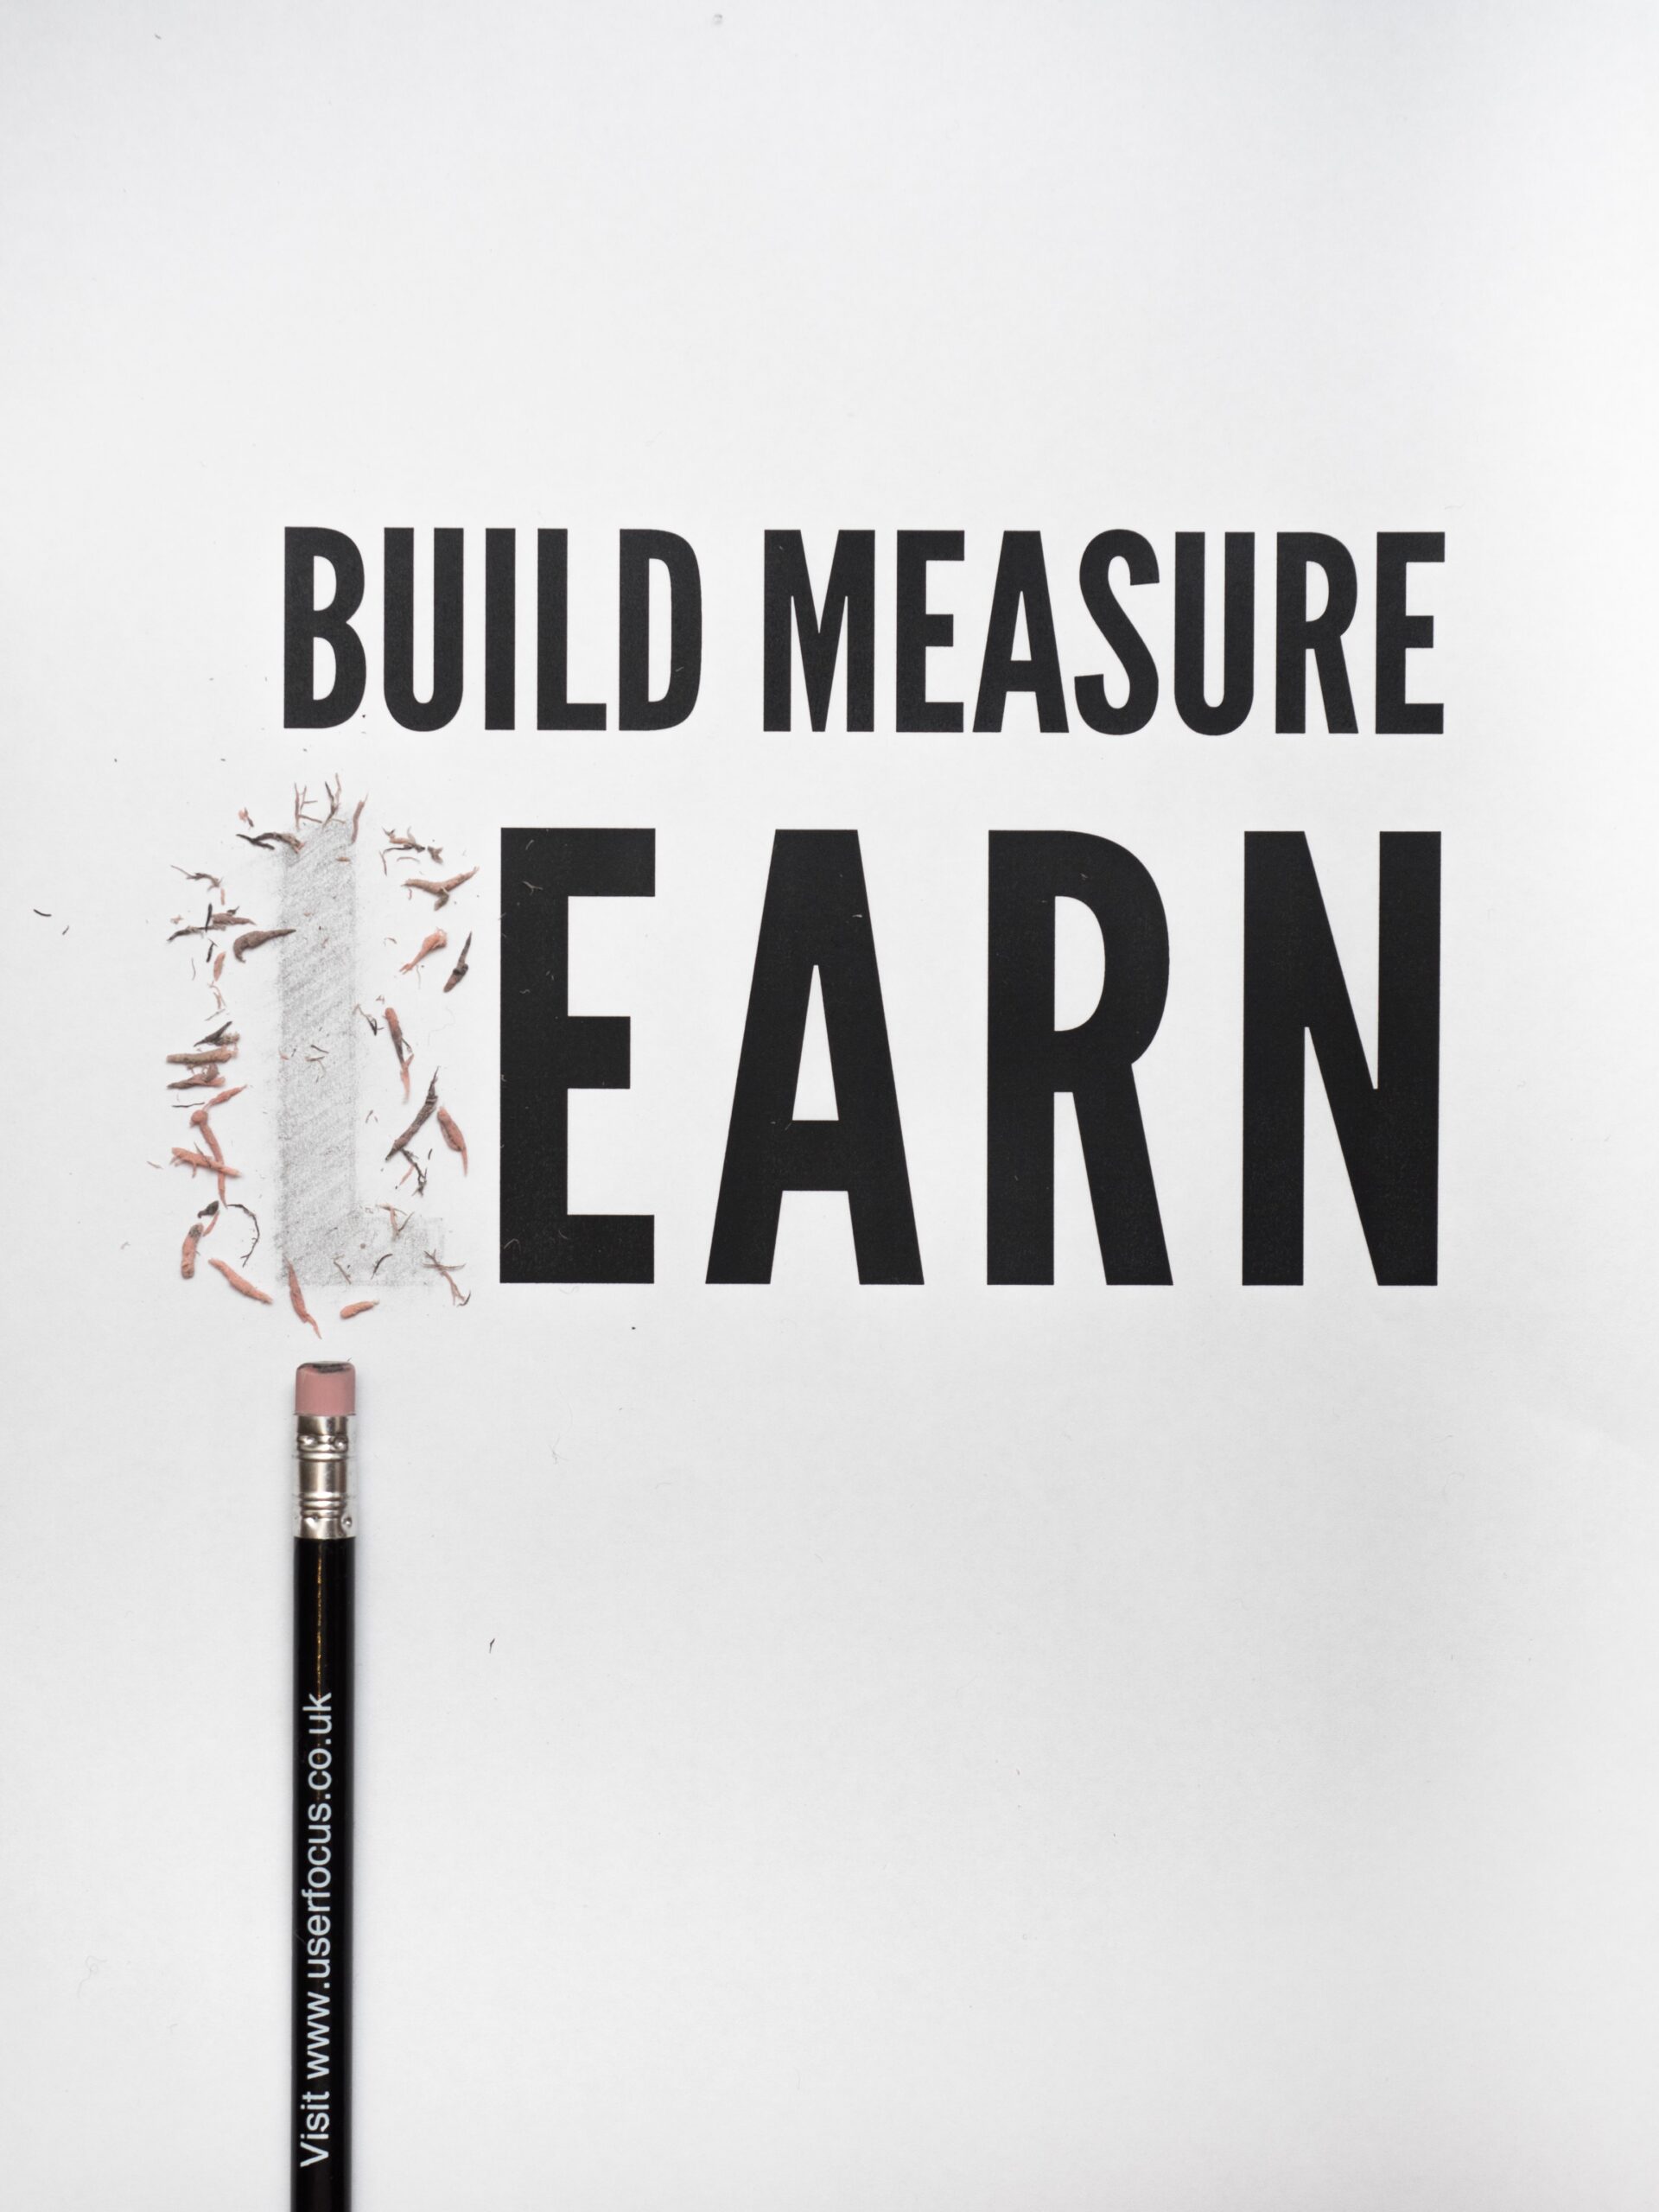 Build measure learn written on paper with the L in learn erased by a pencil